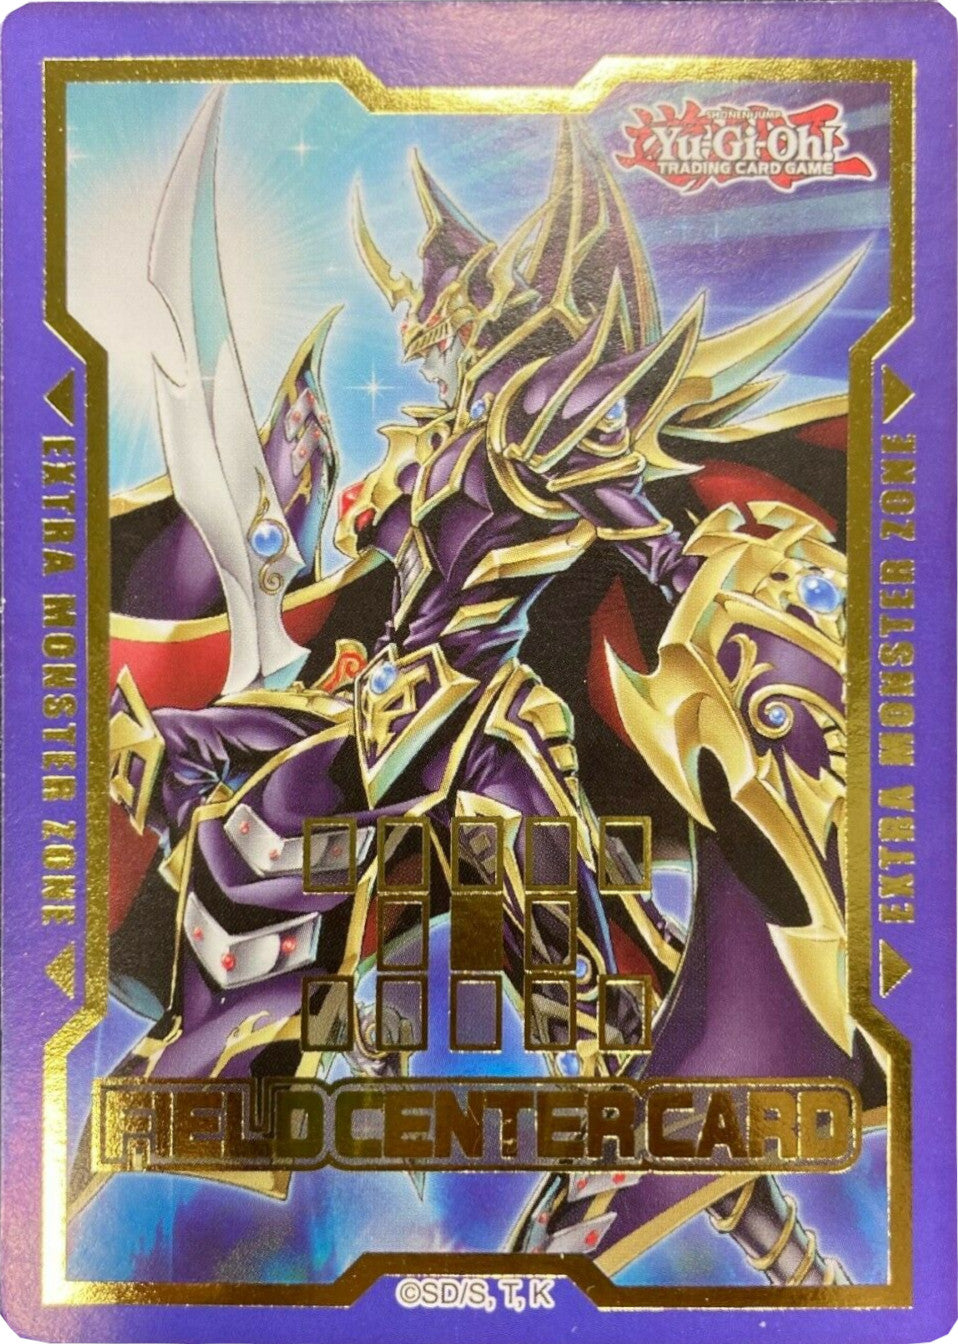 Field Center Card: Master of Chaos Promo | Anubis Games and Hobby